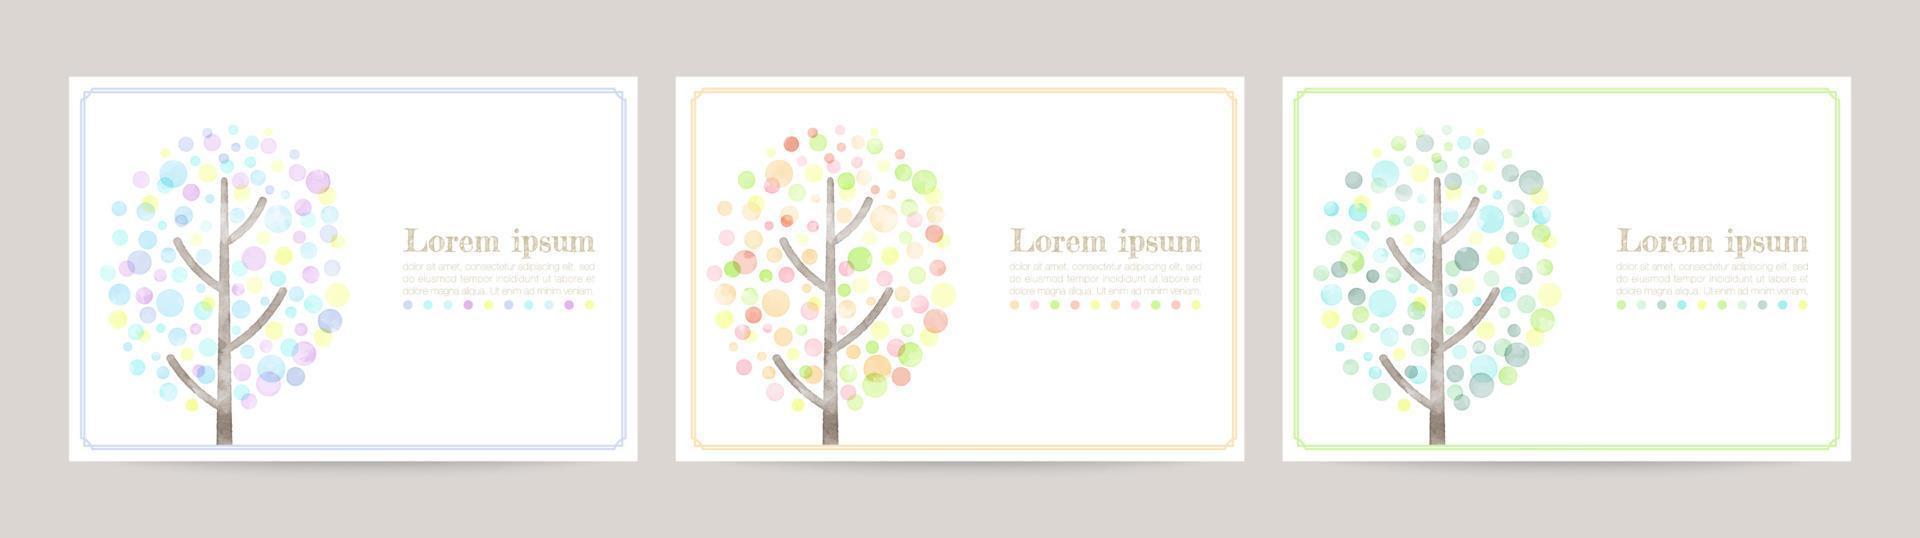 watercolor hand drawn card, tree of colorful dots. Set of cards for greetings vector